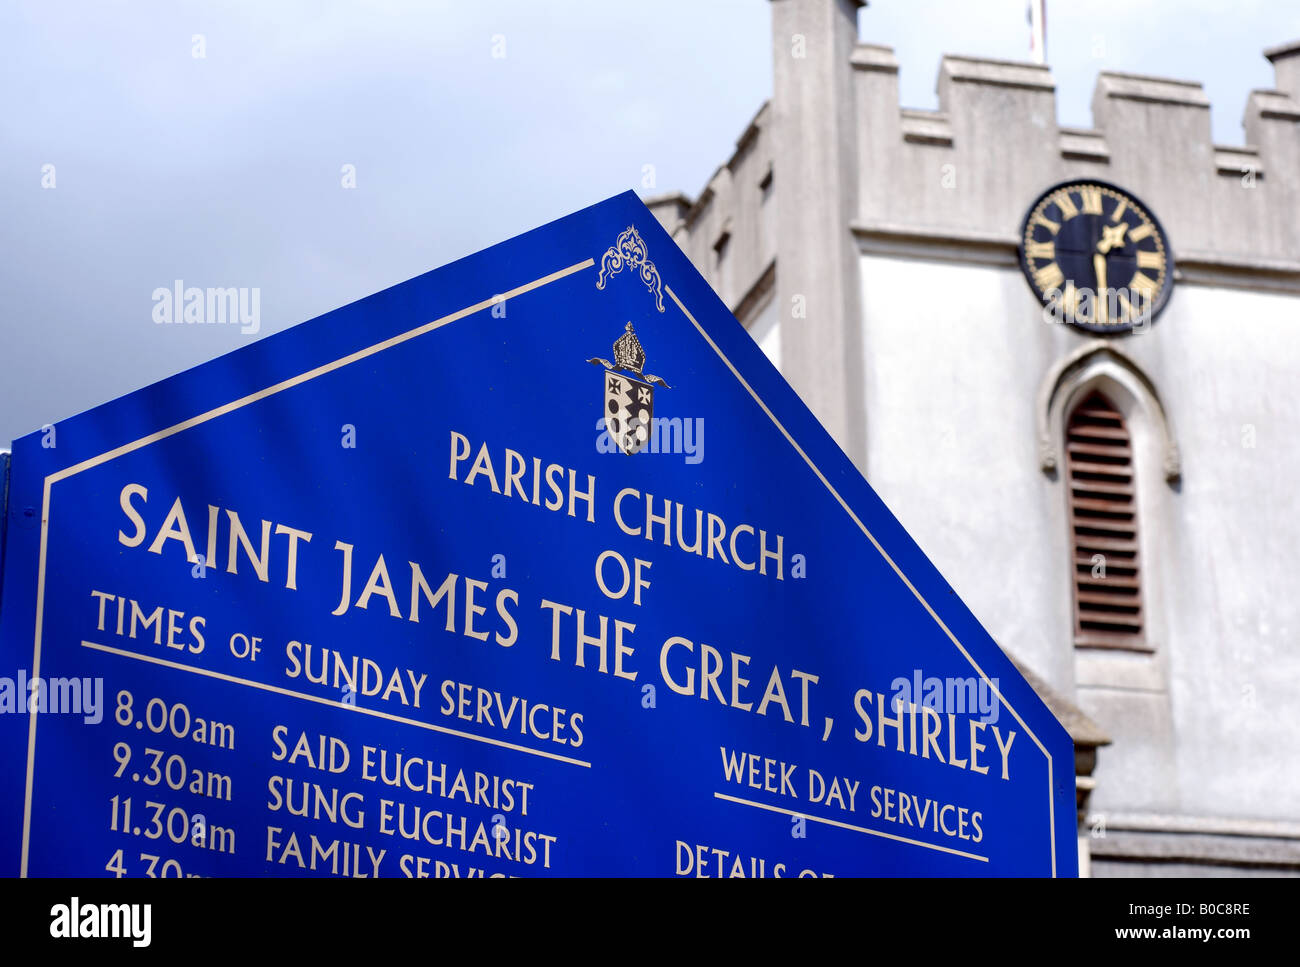 St. James the Great church, Shirley, West Midlands, England, UK Stock Photo